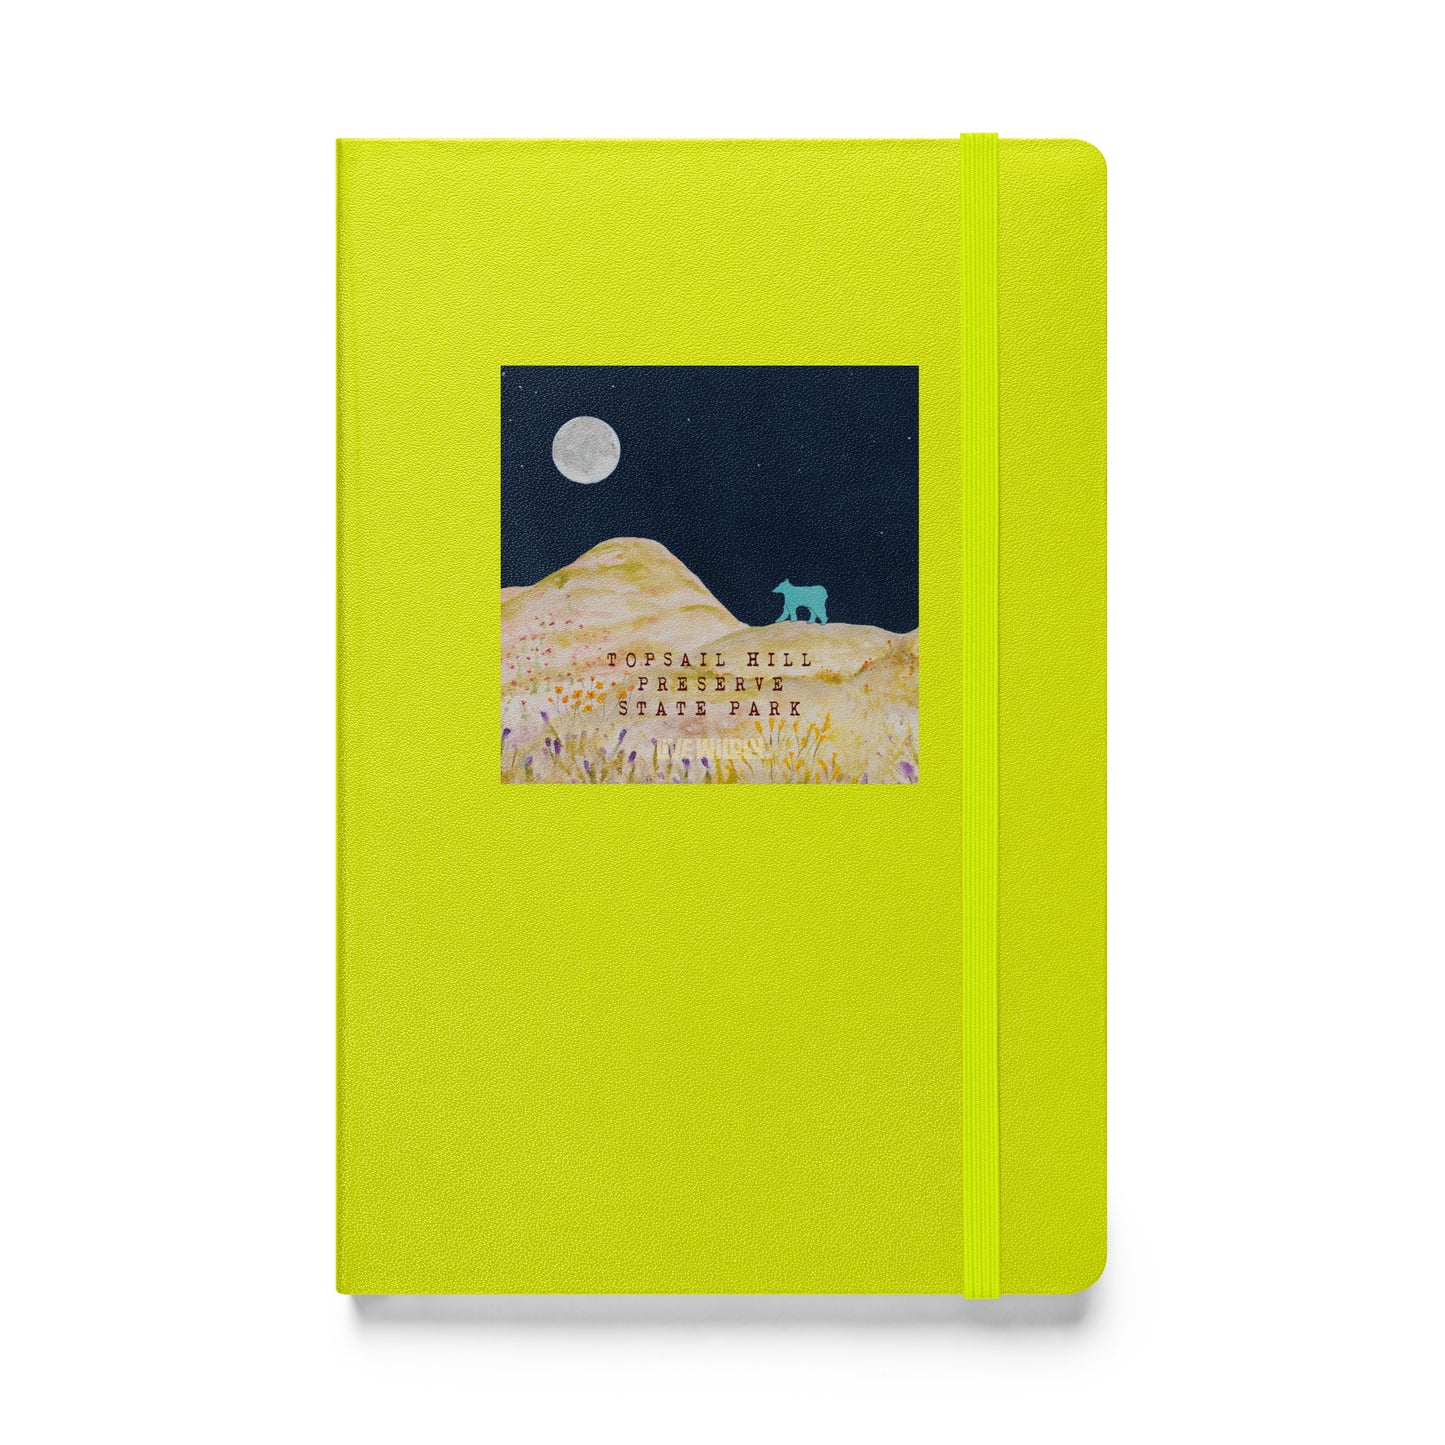 Topsail Preserve Hardcover Notebook by Deborah Mitchell - Live Wildly 